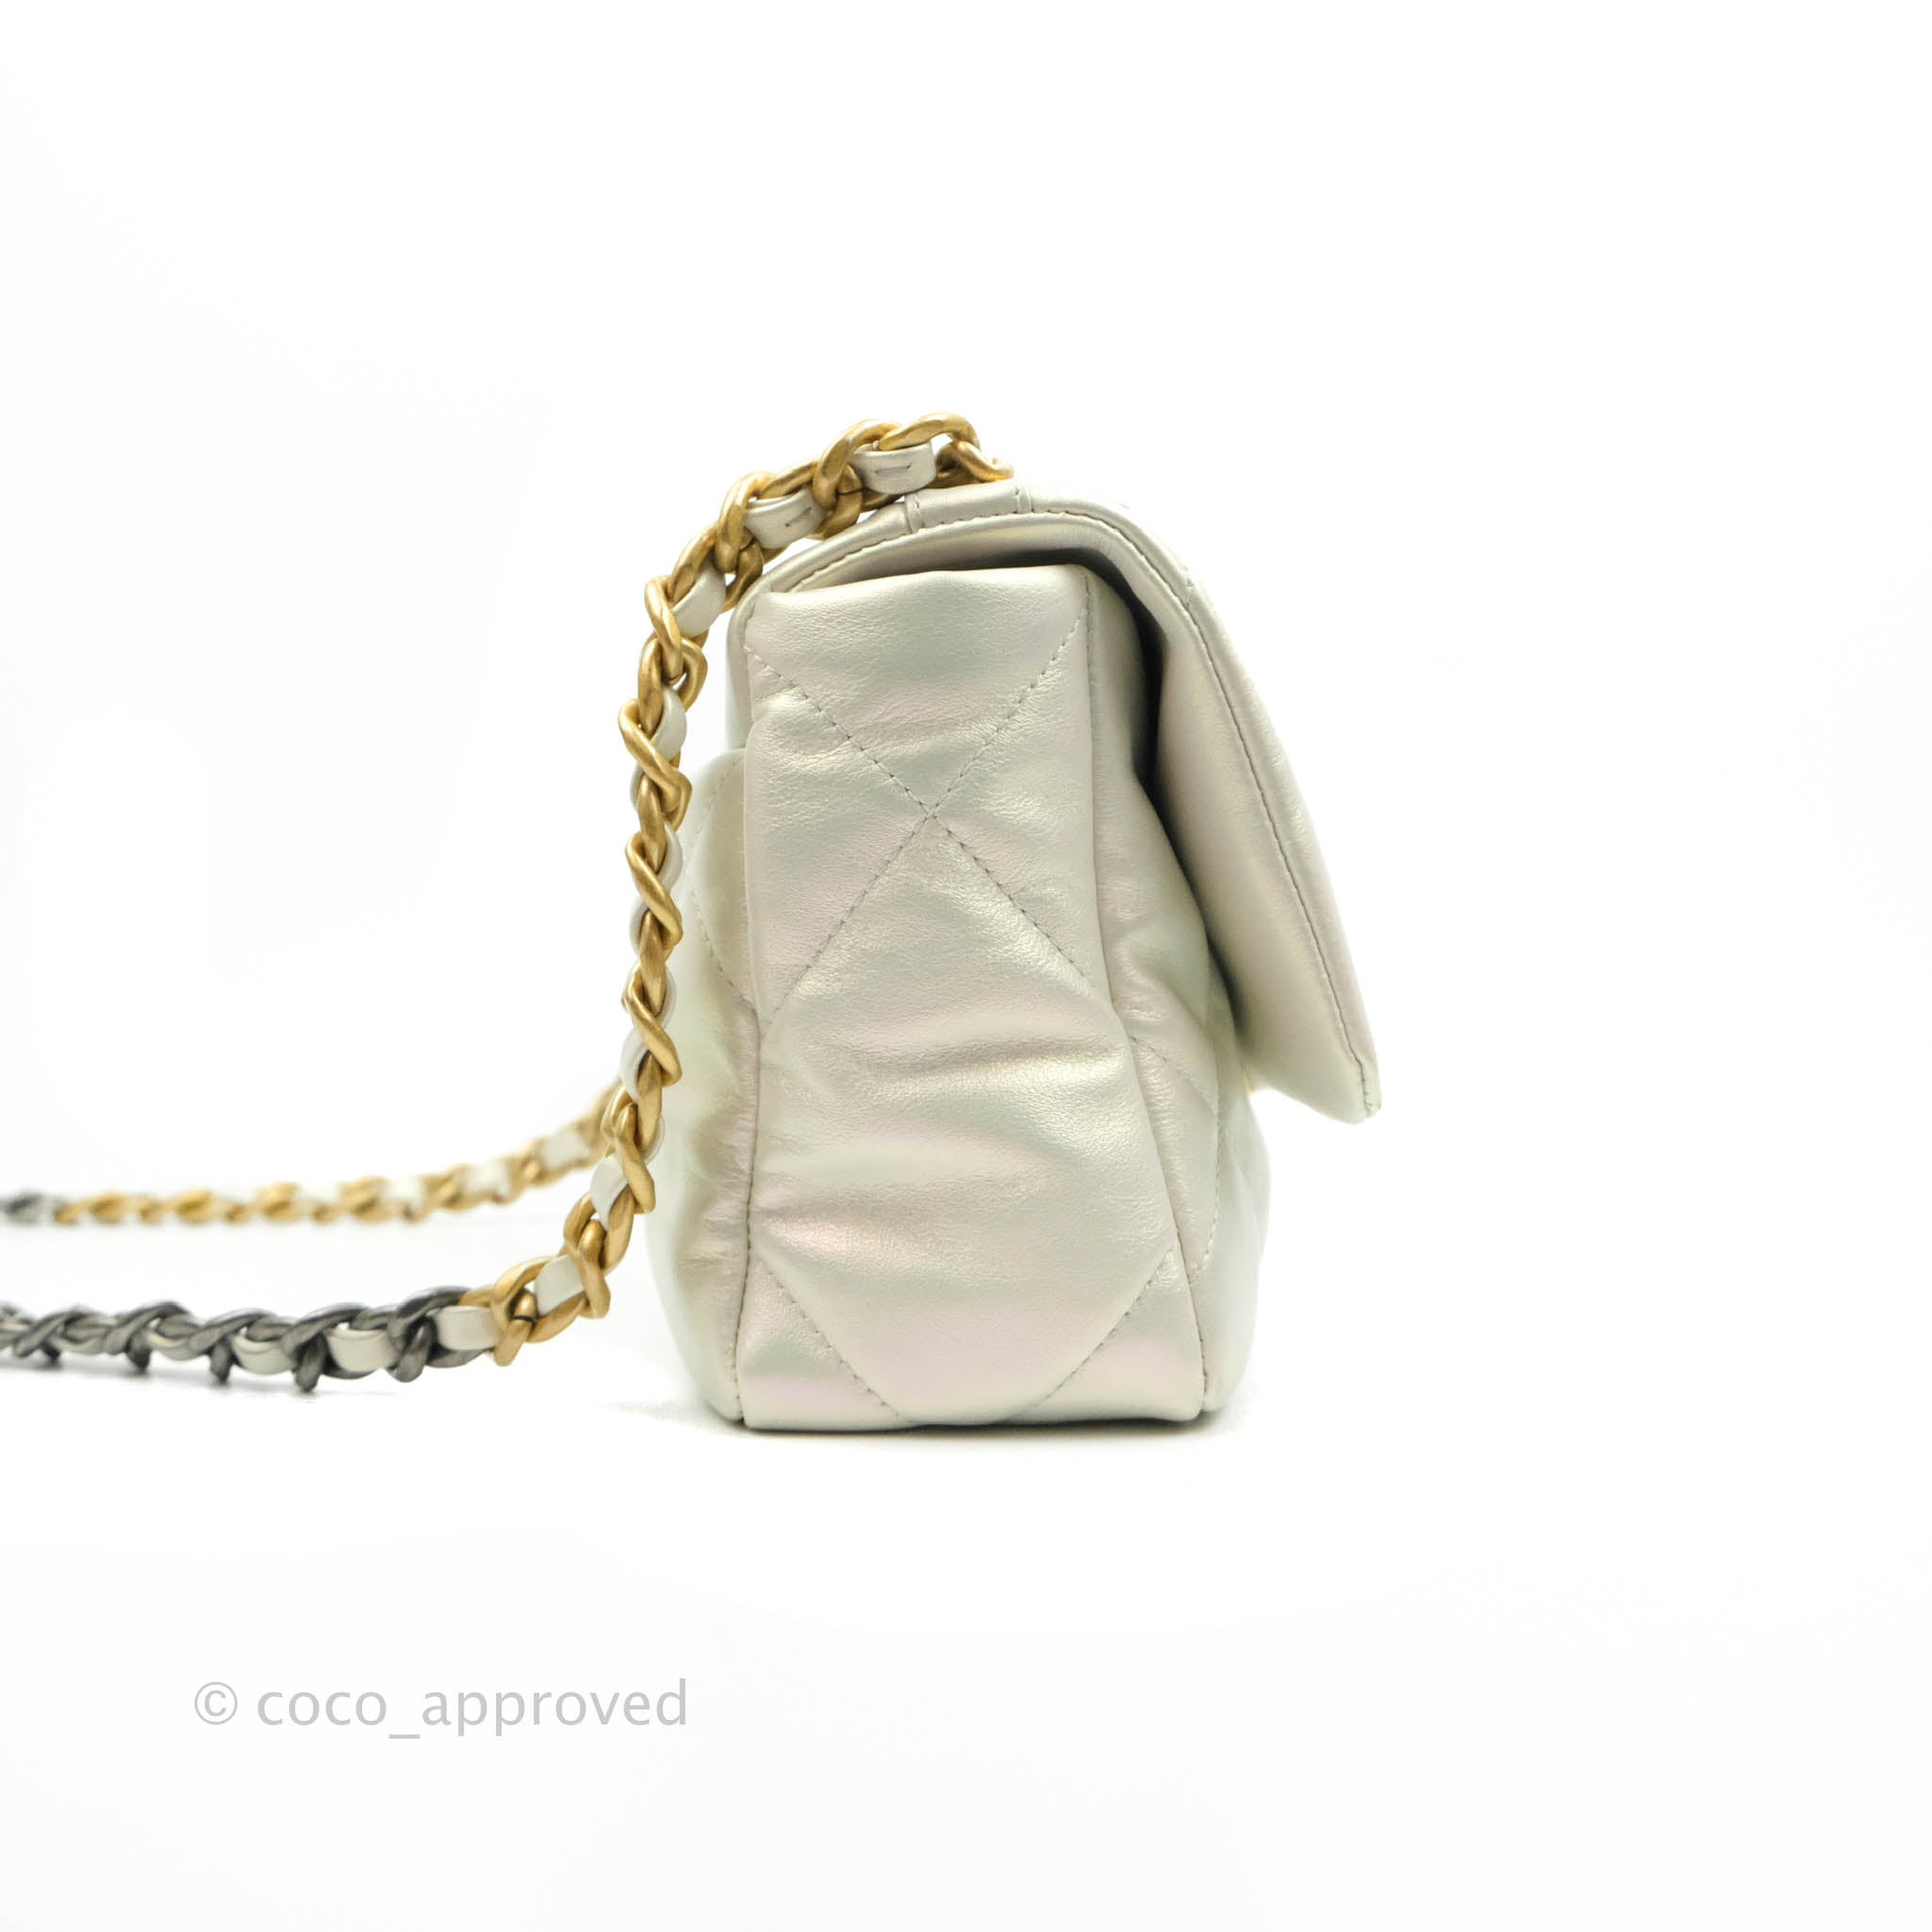 Chanel 19 Small Iridescent White Mixed Hardware – Coco Approved Studio